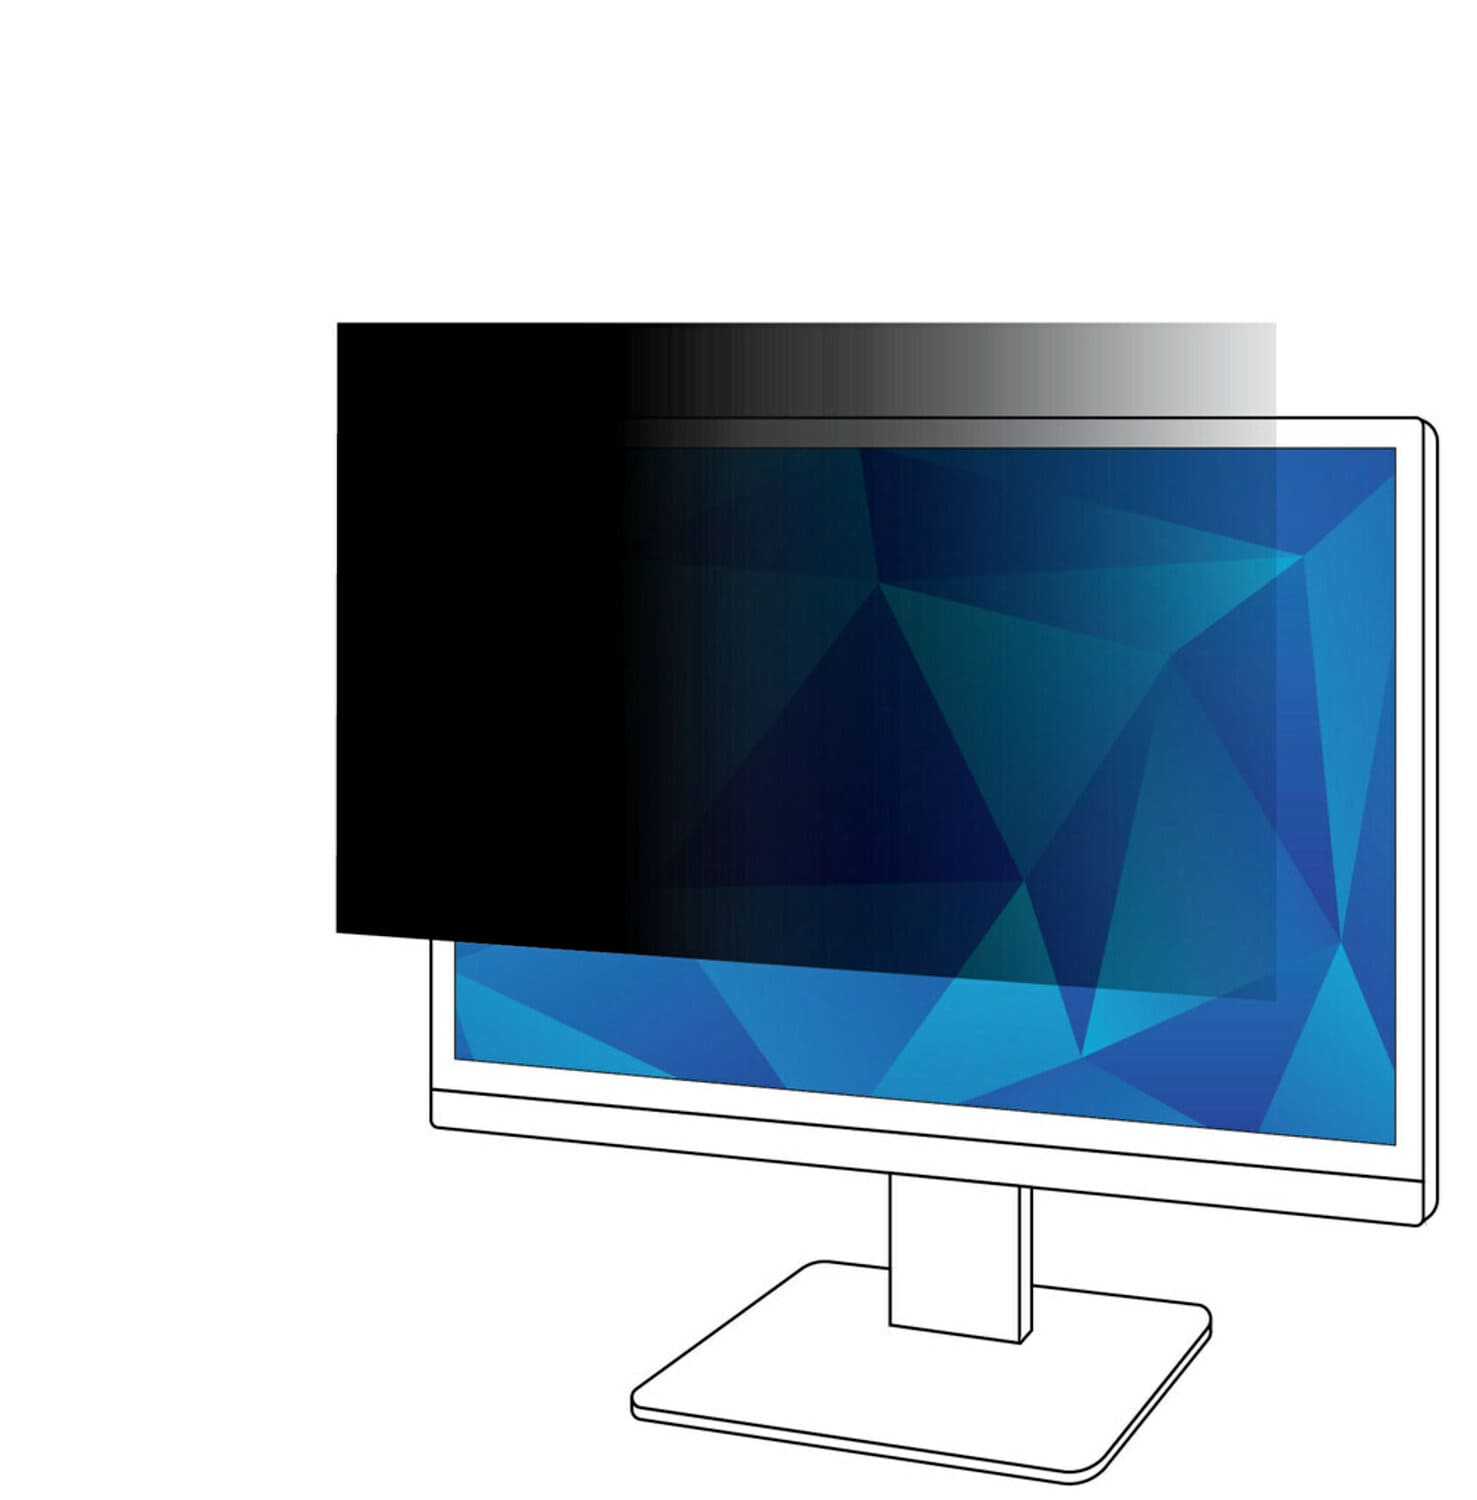 7100026029 - 3M Privacy Filter for 24in Monitor, 16:10, PF240W1B